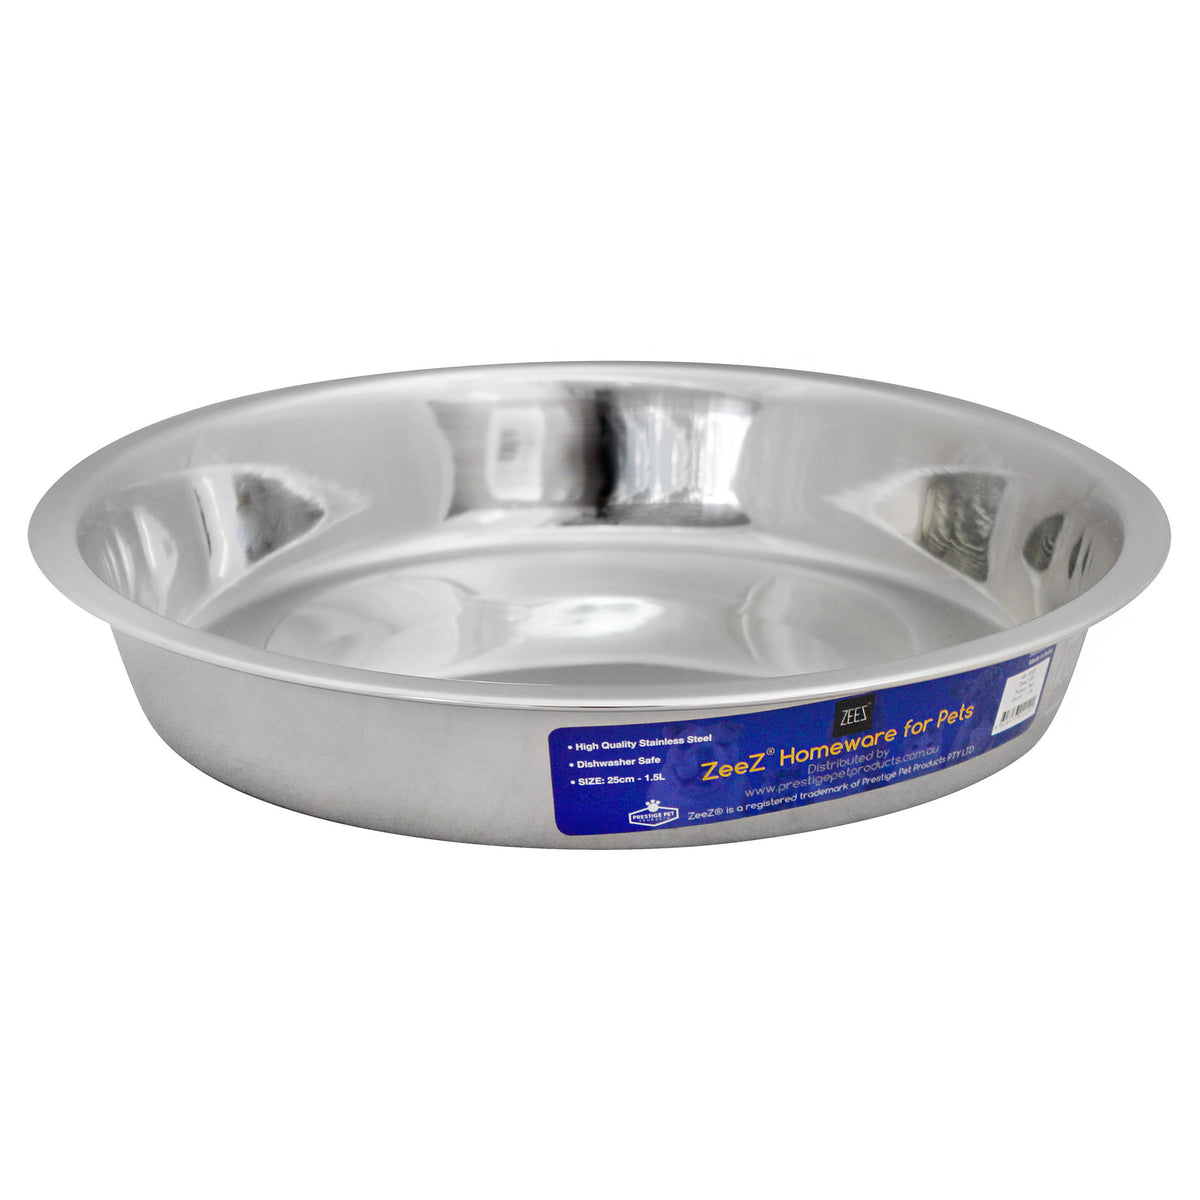 Stainless Steel Puppy Pan